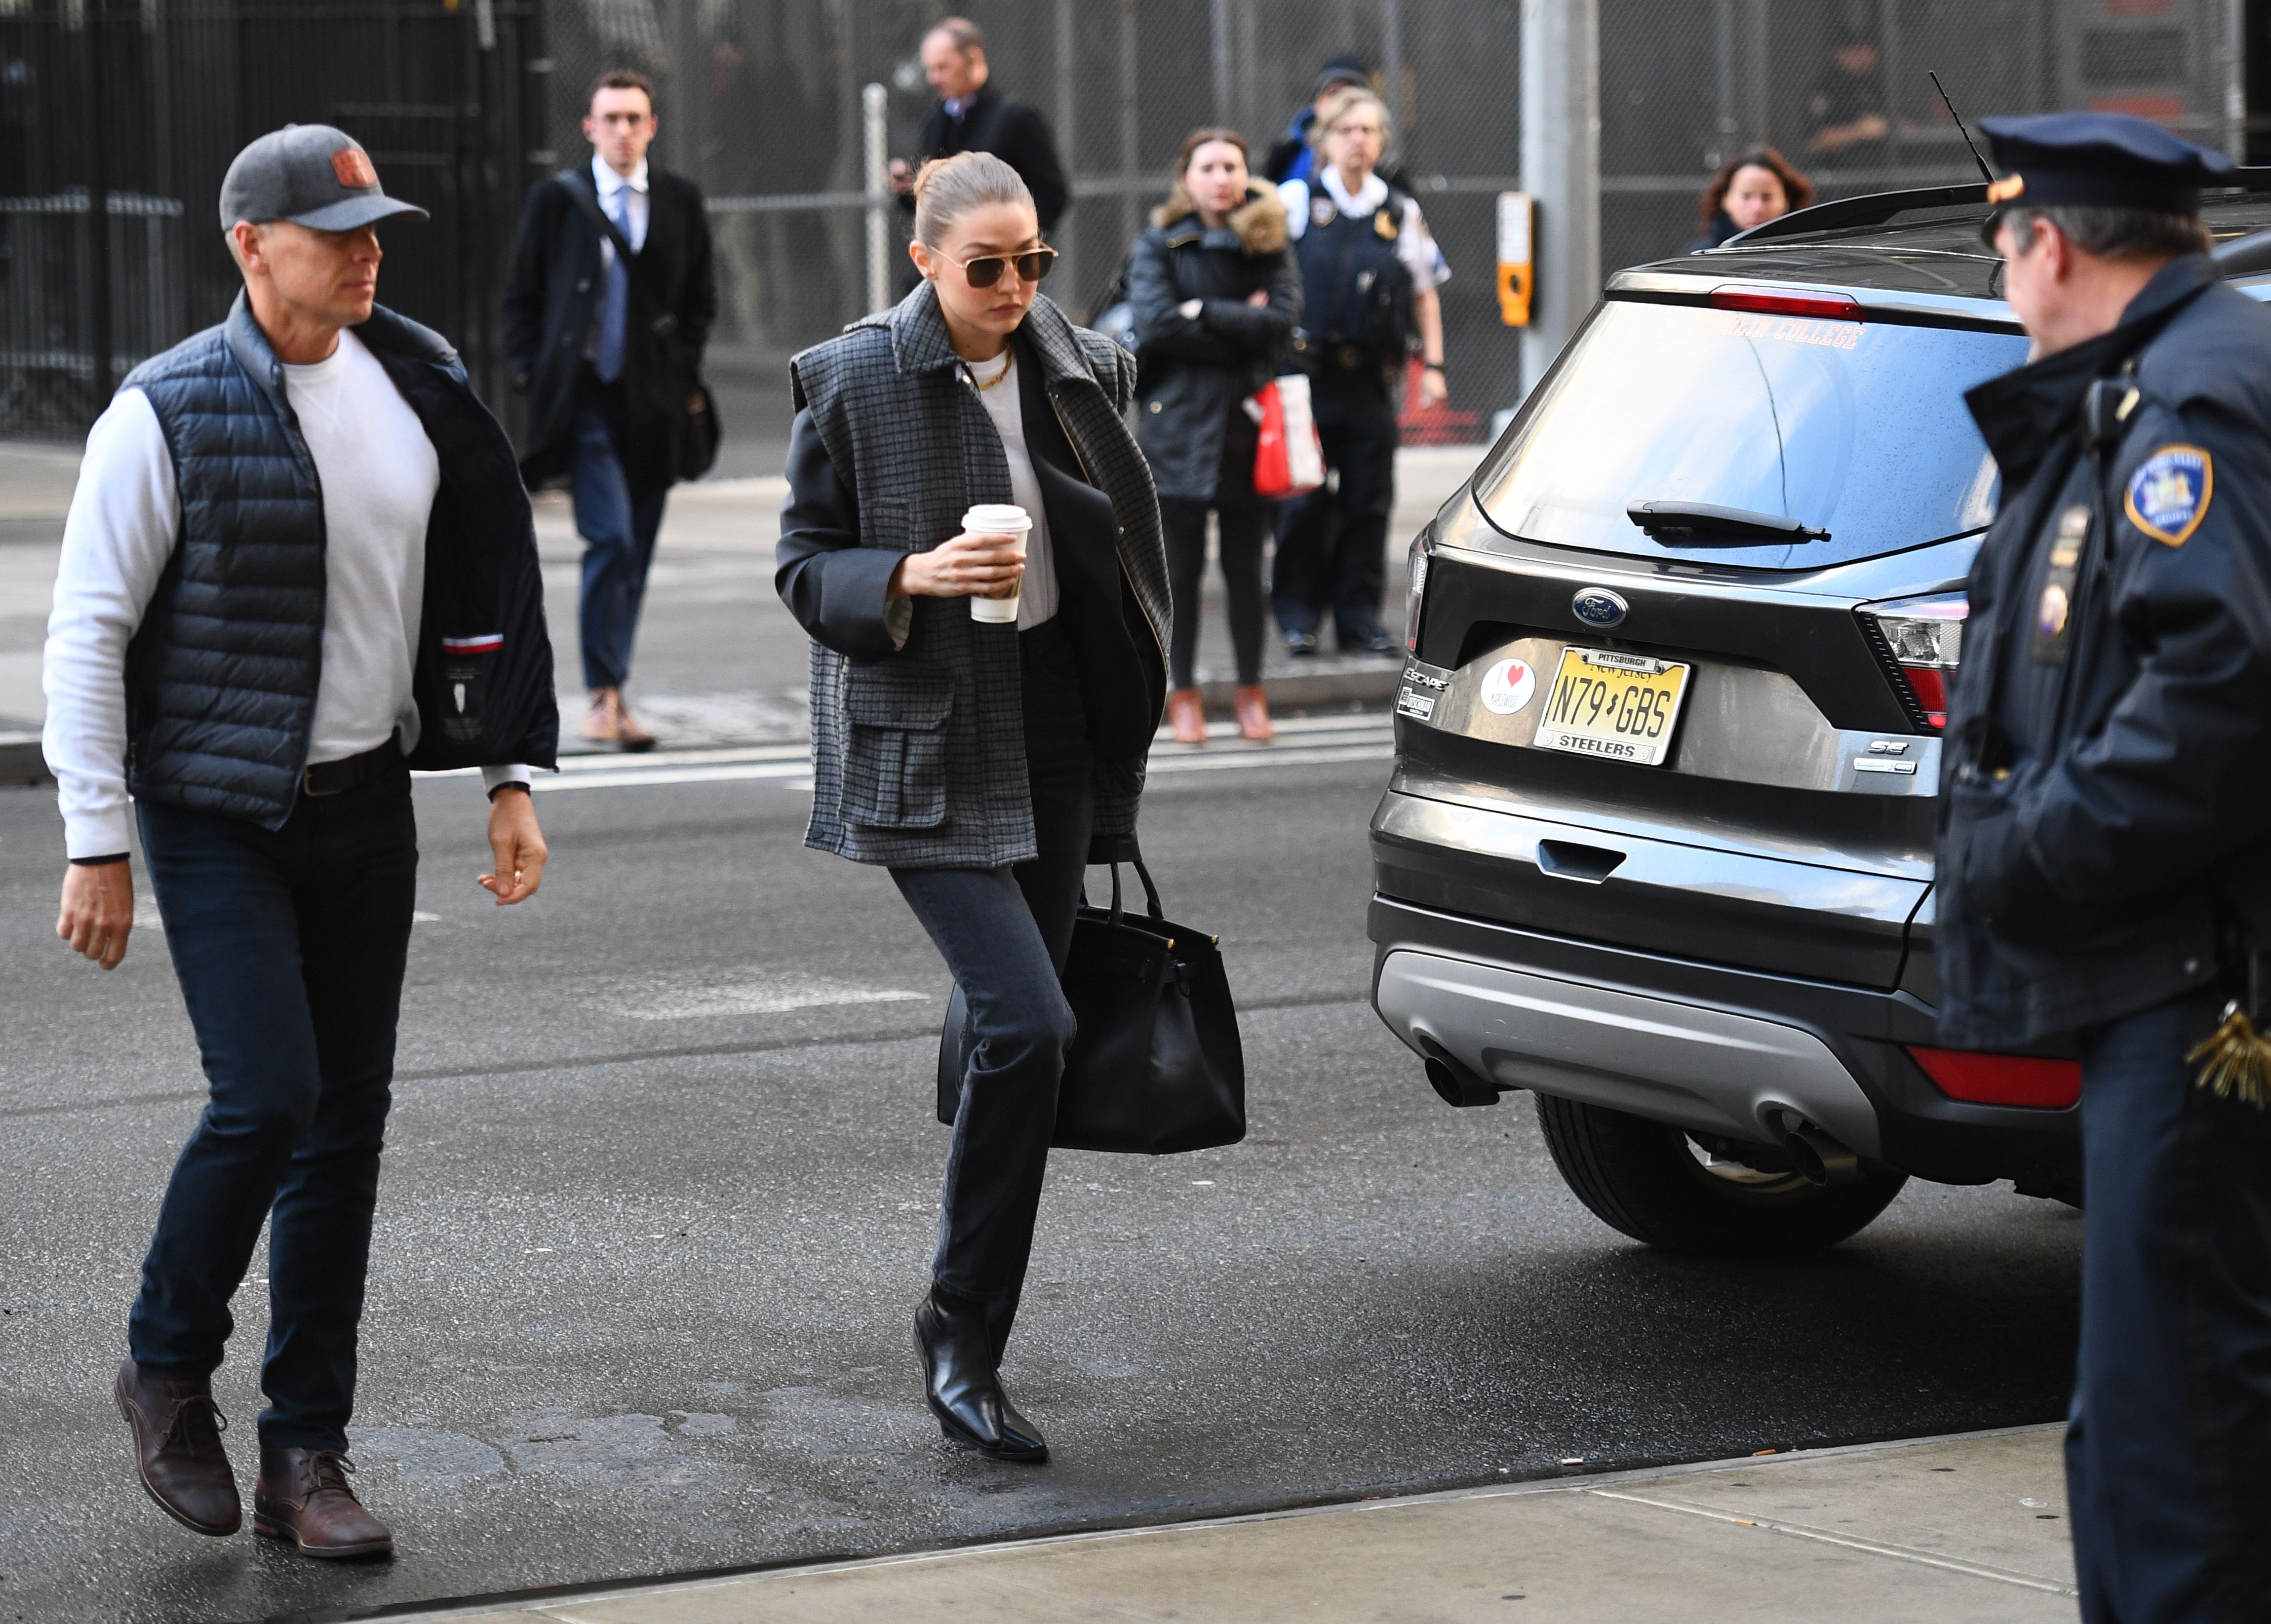 Model Gigi Hadid arrives at Manhattan Criminal Court, on January 16, 2020, in New York City. - Hadid has been called as a potential juror in disgraced movie producer Harvey Weinstein's rape and sexual assault trial, adding a fresh celebrity twist to the high-profile proceedings. (Photo by JOHANNES EISELE/AFP via Getty Images)